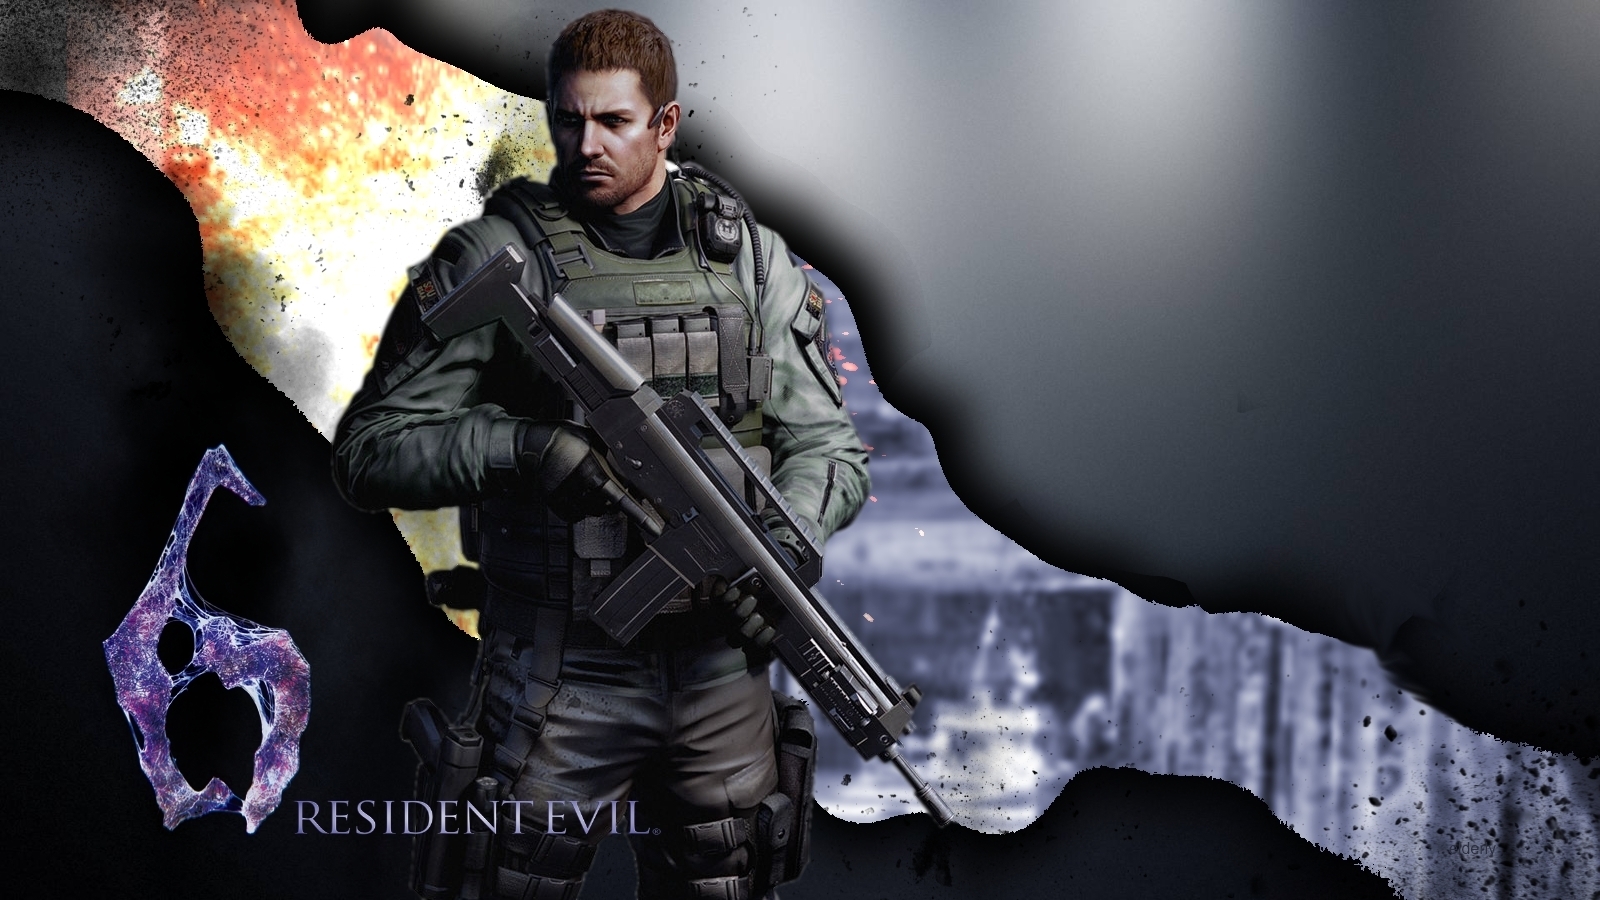 1080p Wallpaper By My Contributor Resident Evil